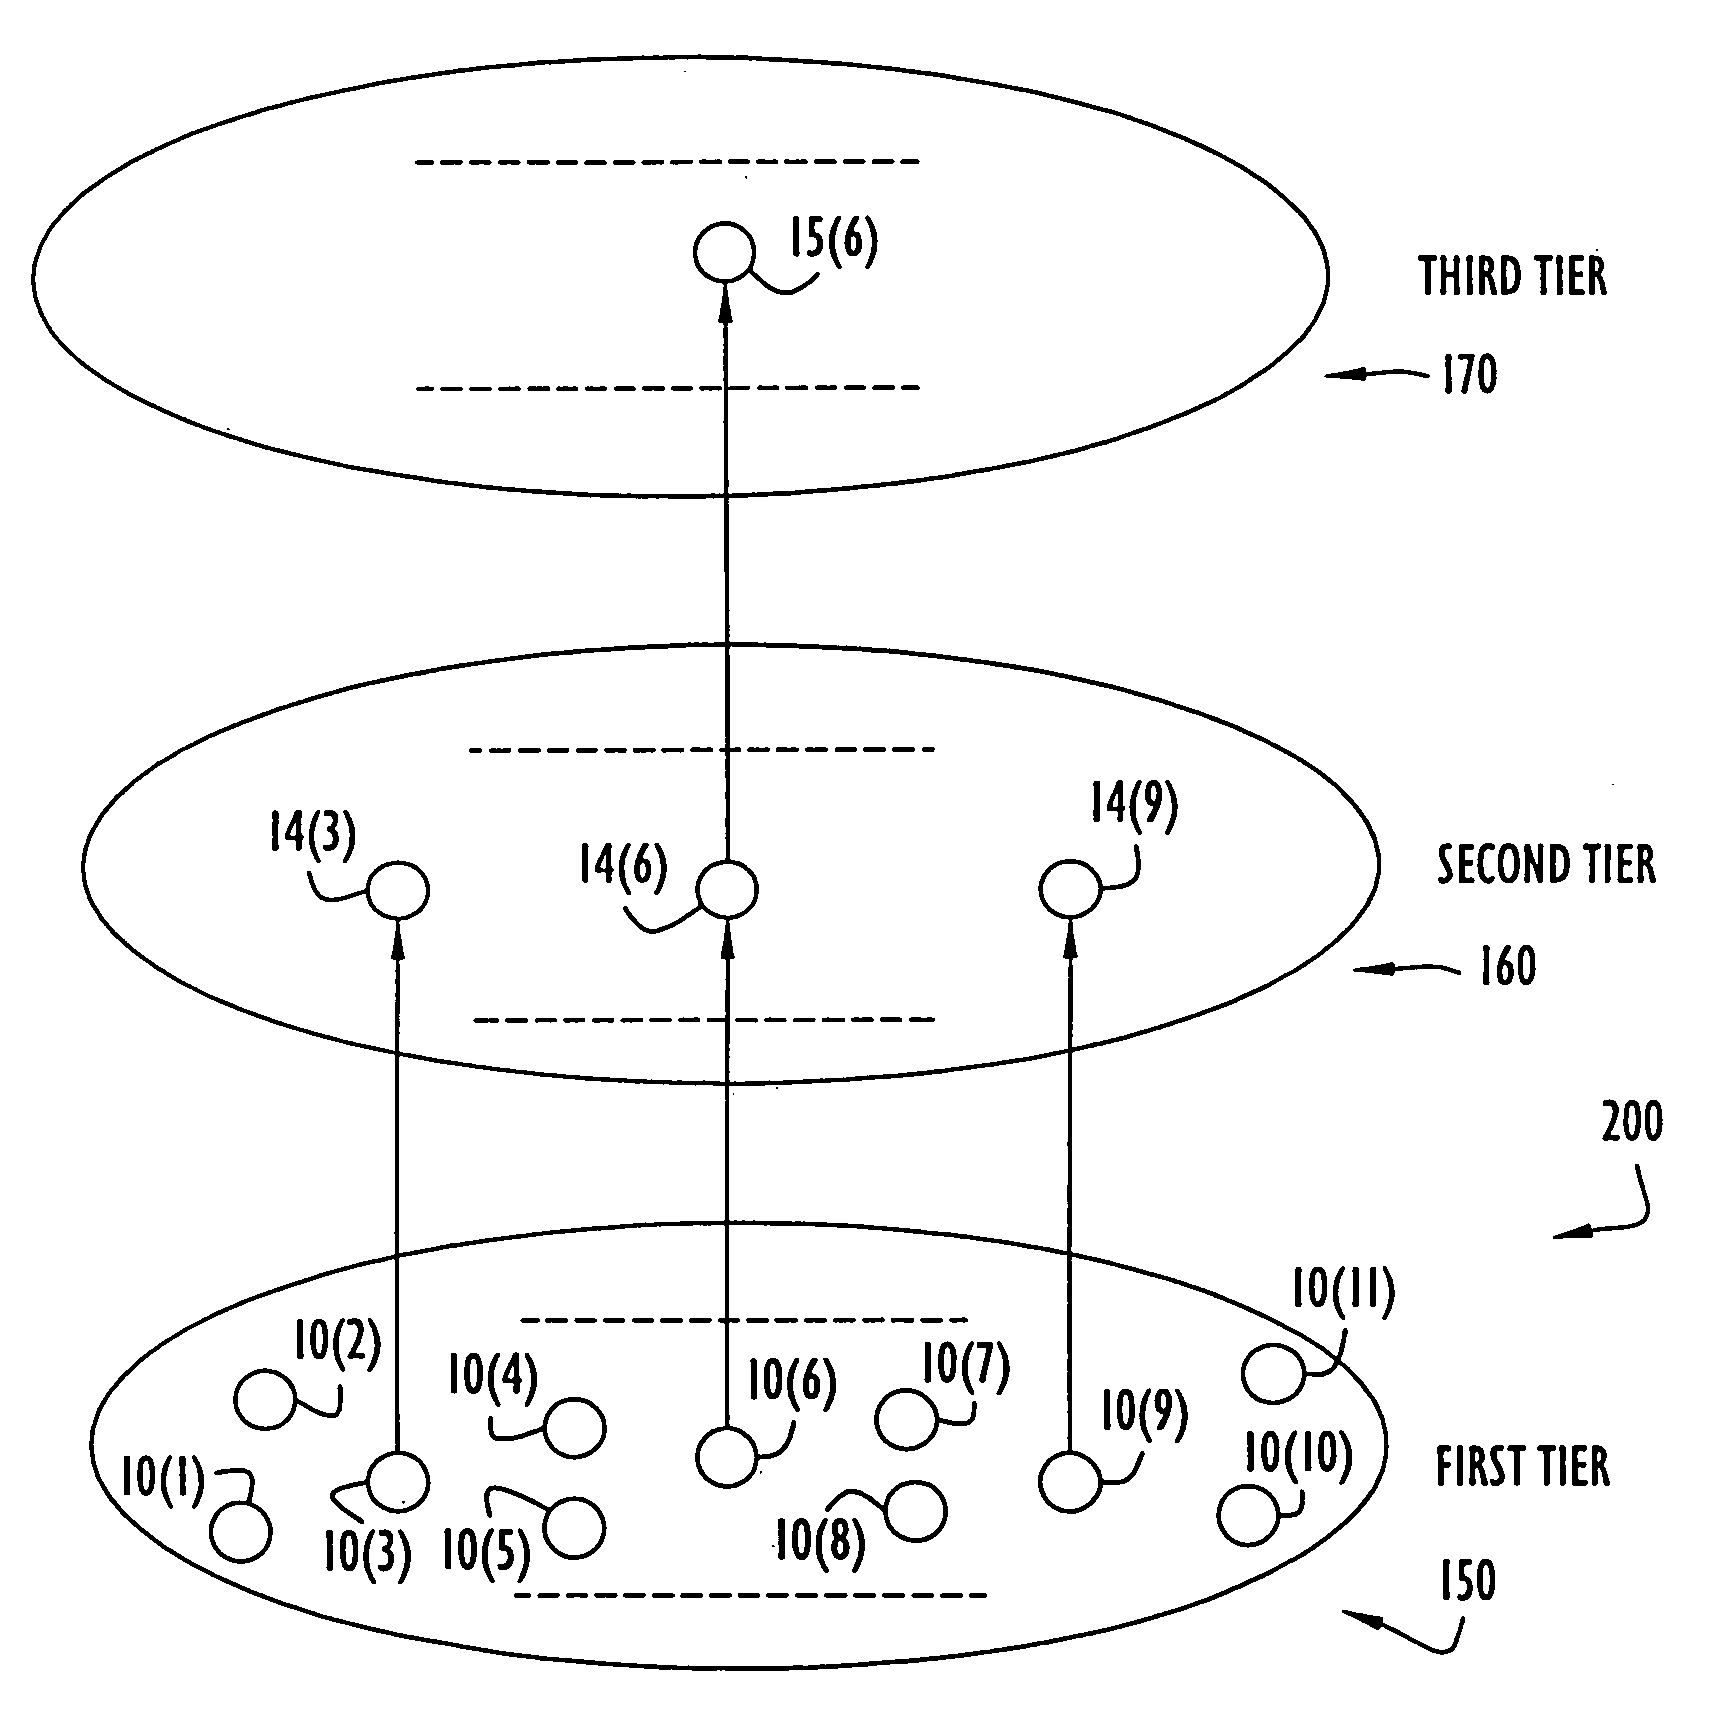 Method and apparatus for communication network cluster formation and transmission of node link status messages with reduced protocol overhead traffic